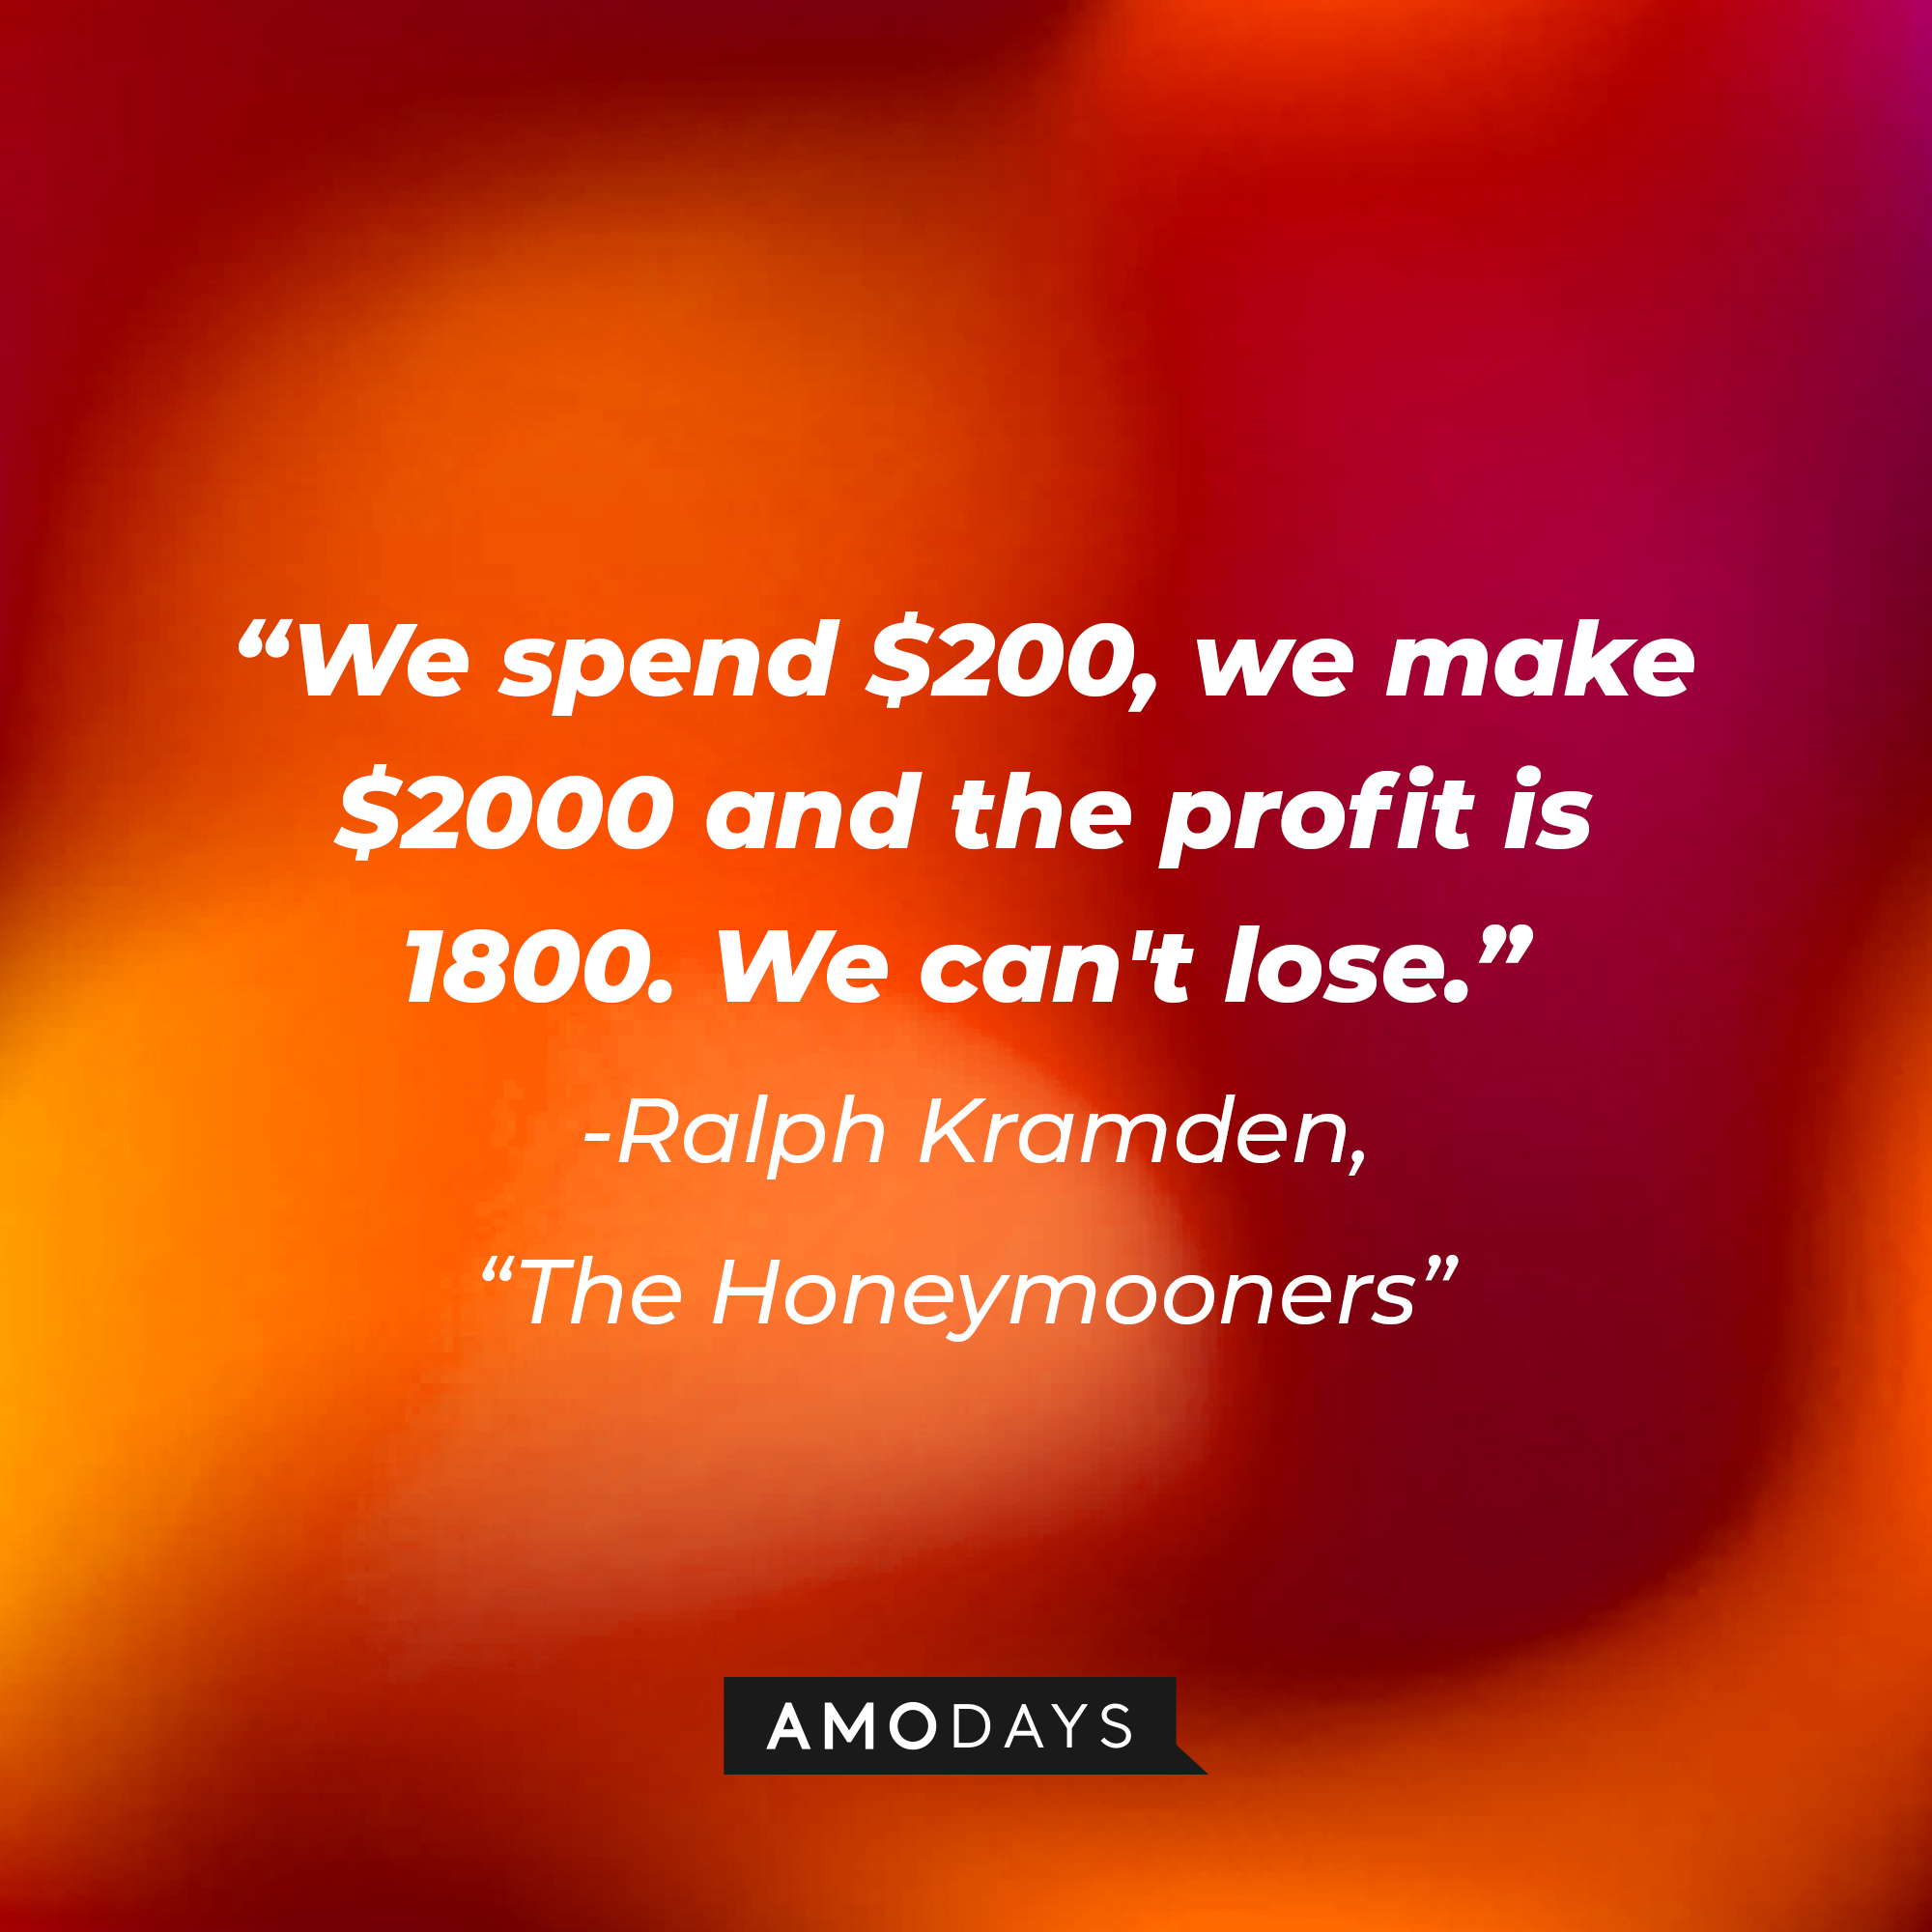 A quote from "The Honeymooners" star Ralph Kramden: "We spend $200, we make $2000 and the profit is 1800. We can't lose." | Source: AmoDays